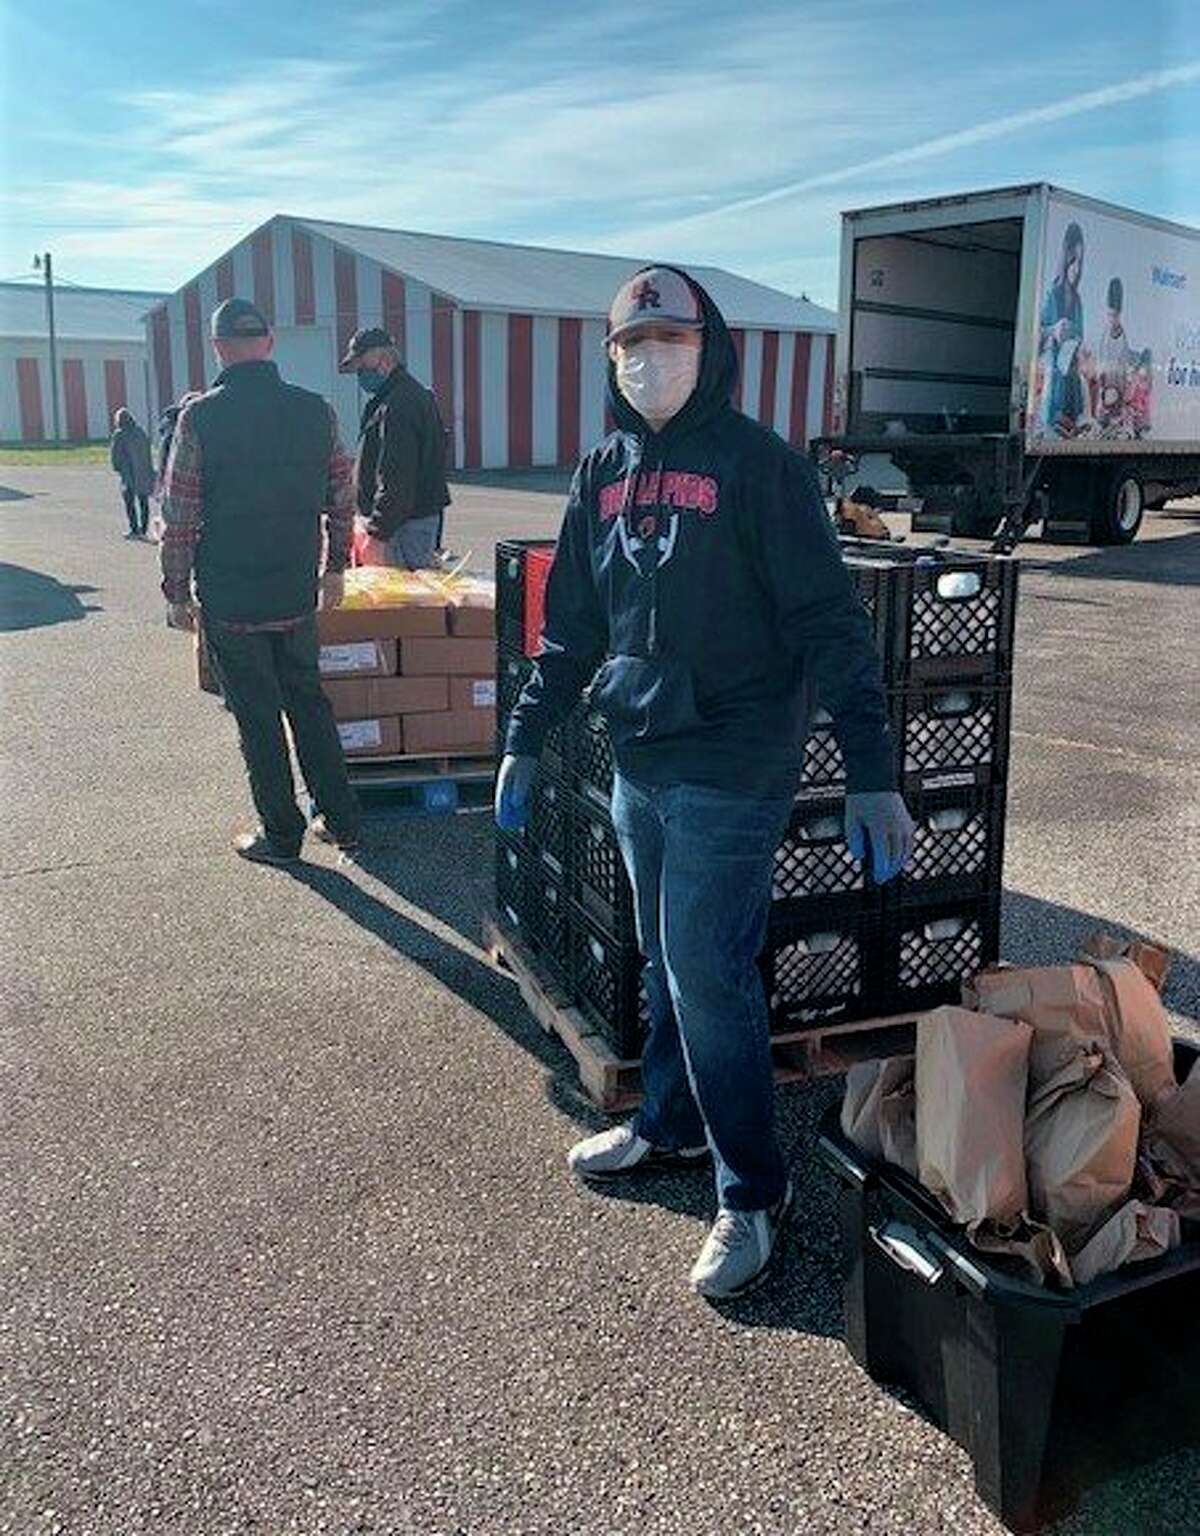 As well as asking guests to remain in their vehicle during the mobile pantry event, volunteers wore face masks as they distributed the bags of food to the cars. (Courtesy photo)